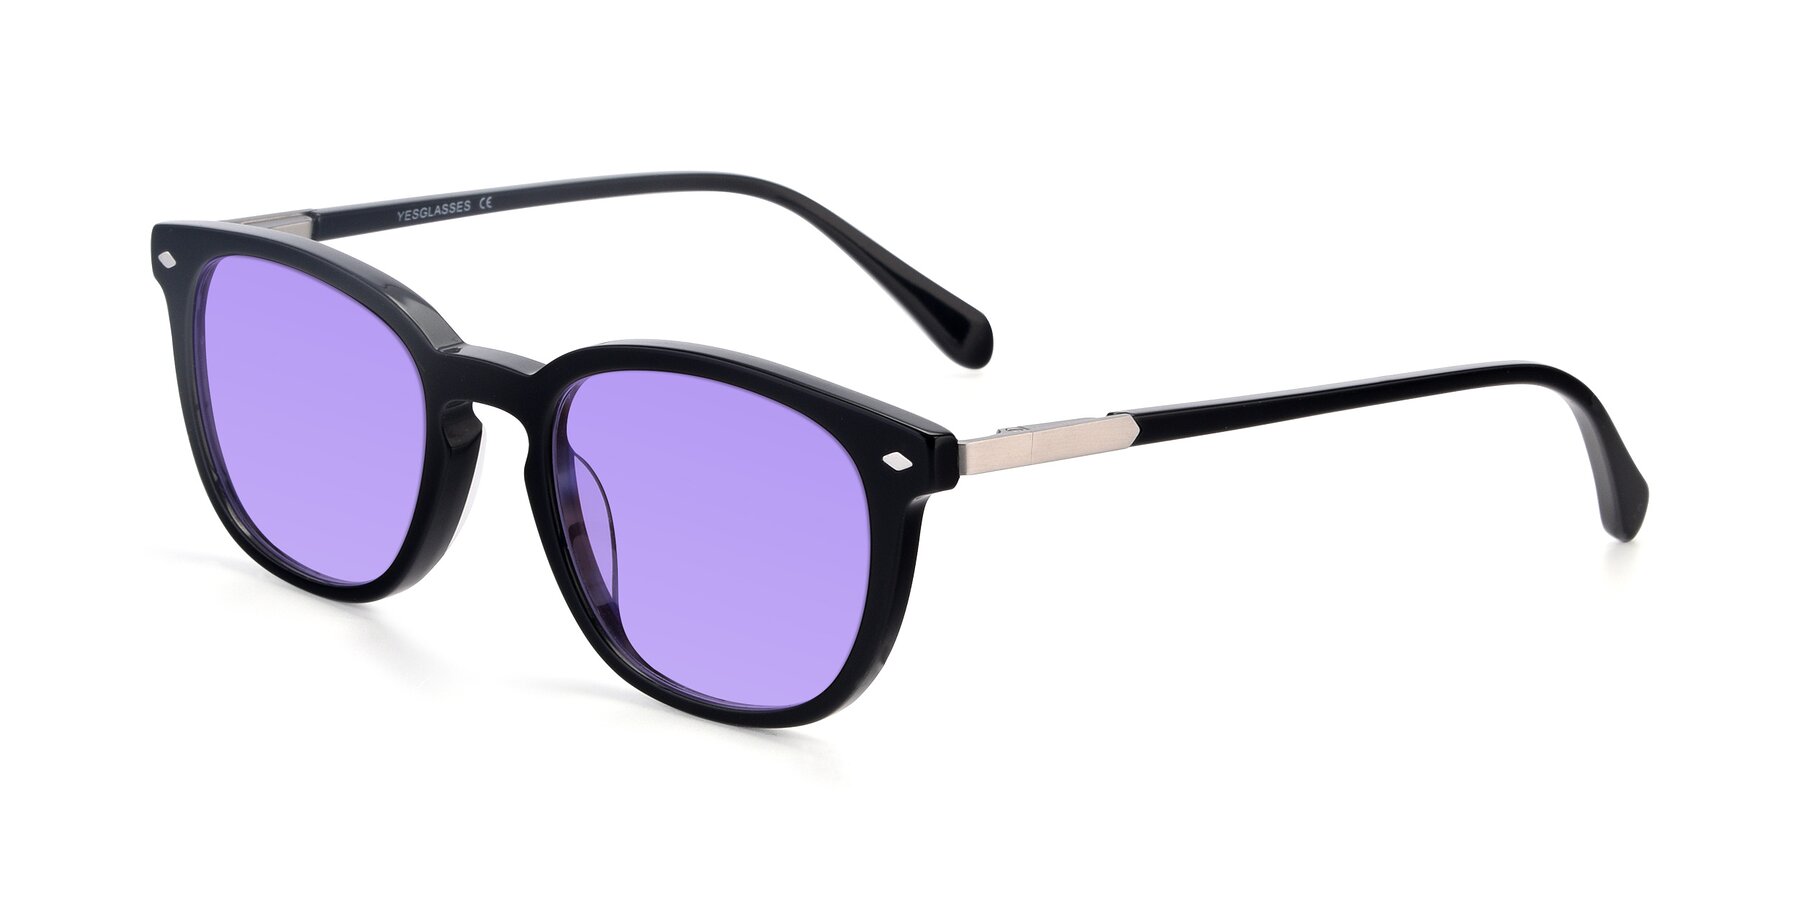 Angle of 17578 in Black with Medium Purple Tinted Lenses